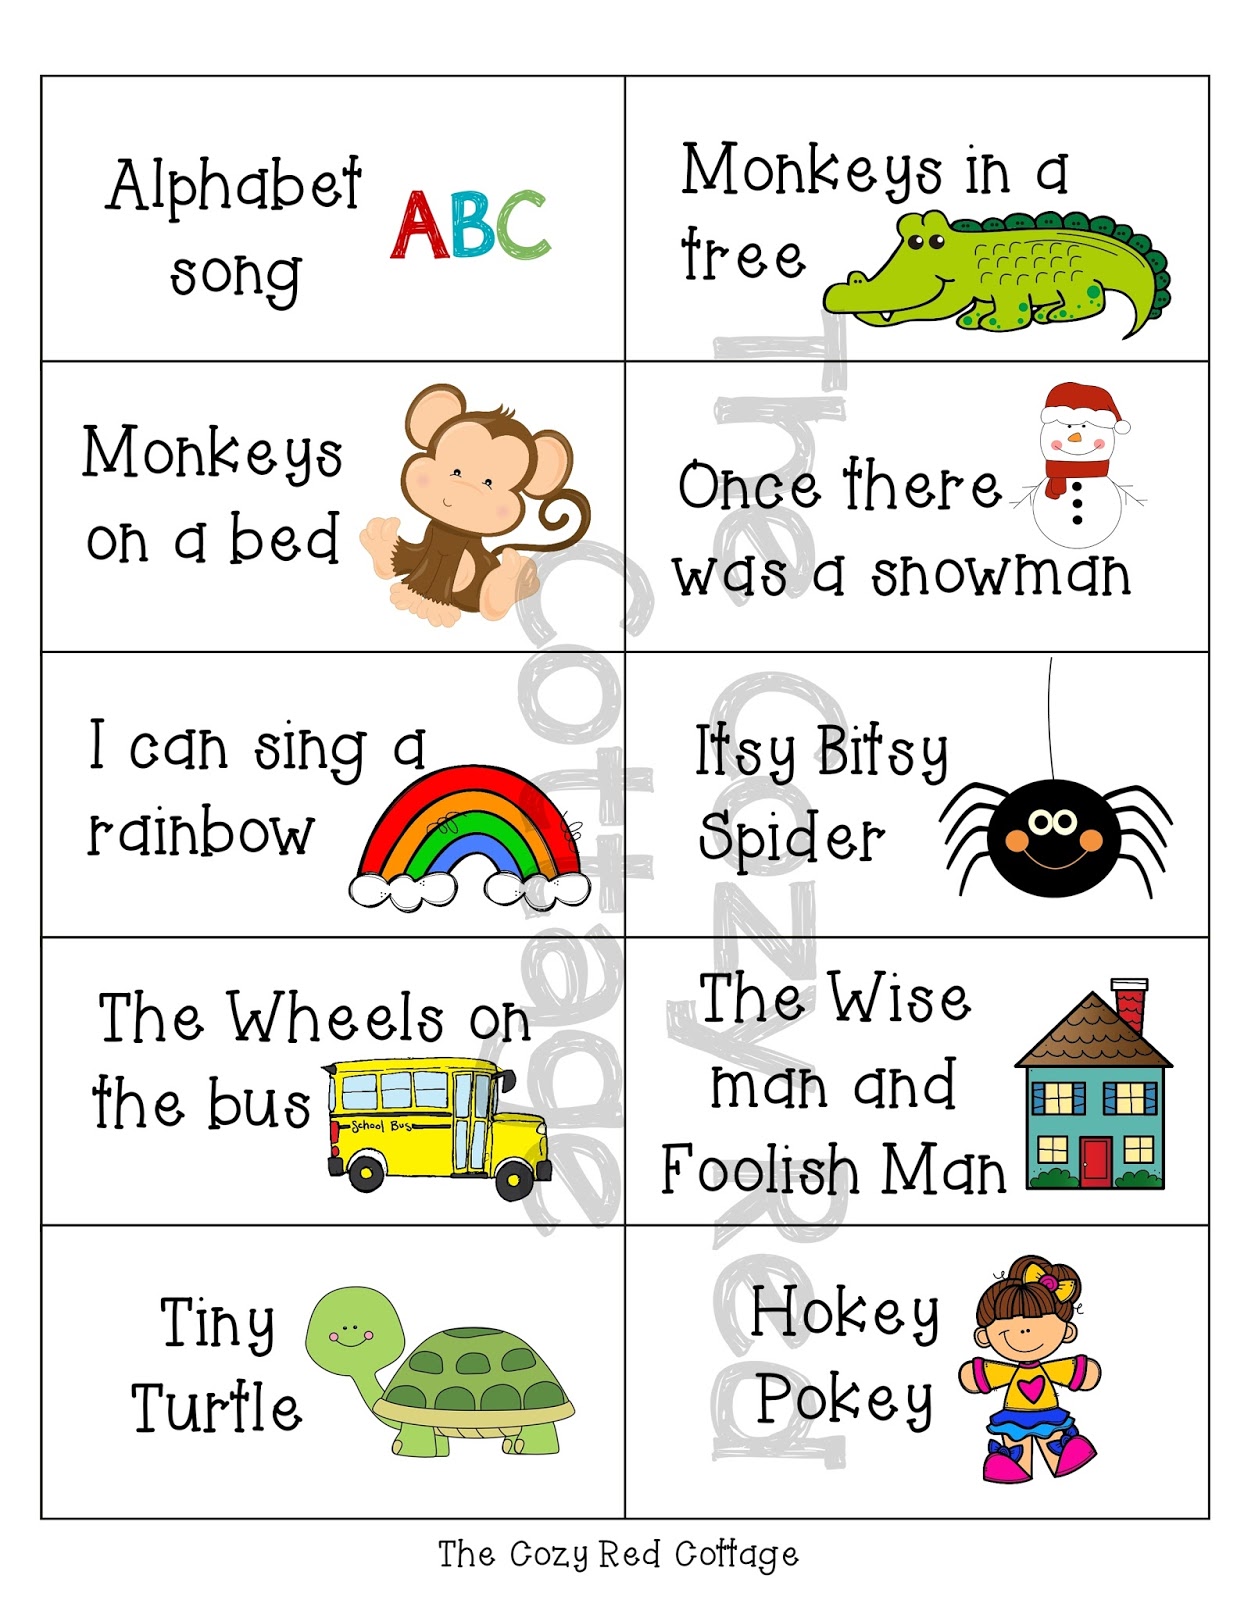 The Cozy Red Cottage 30 Preschool Song Cards free Printables 